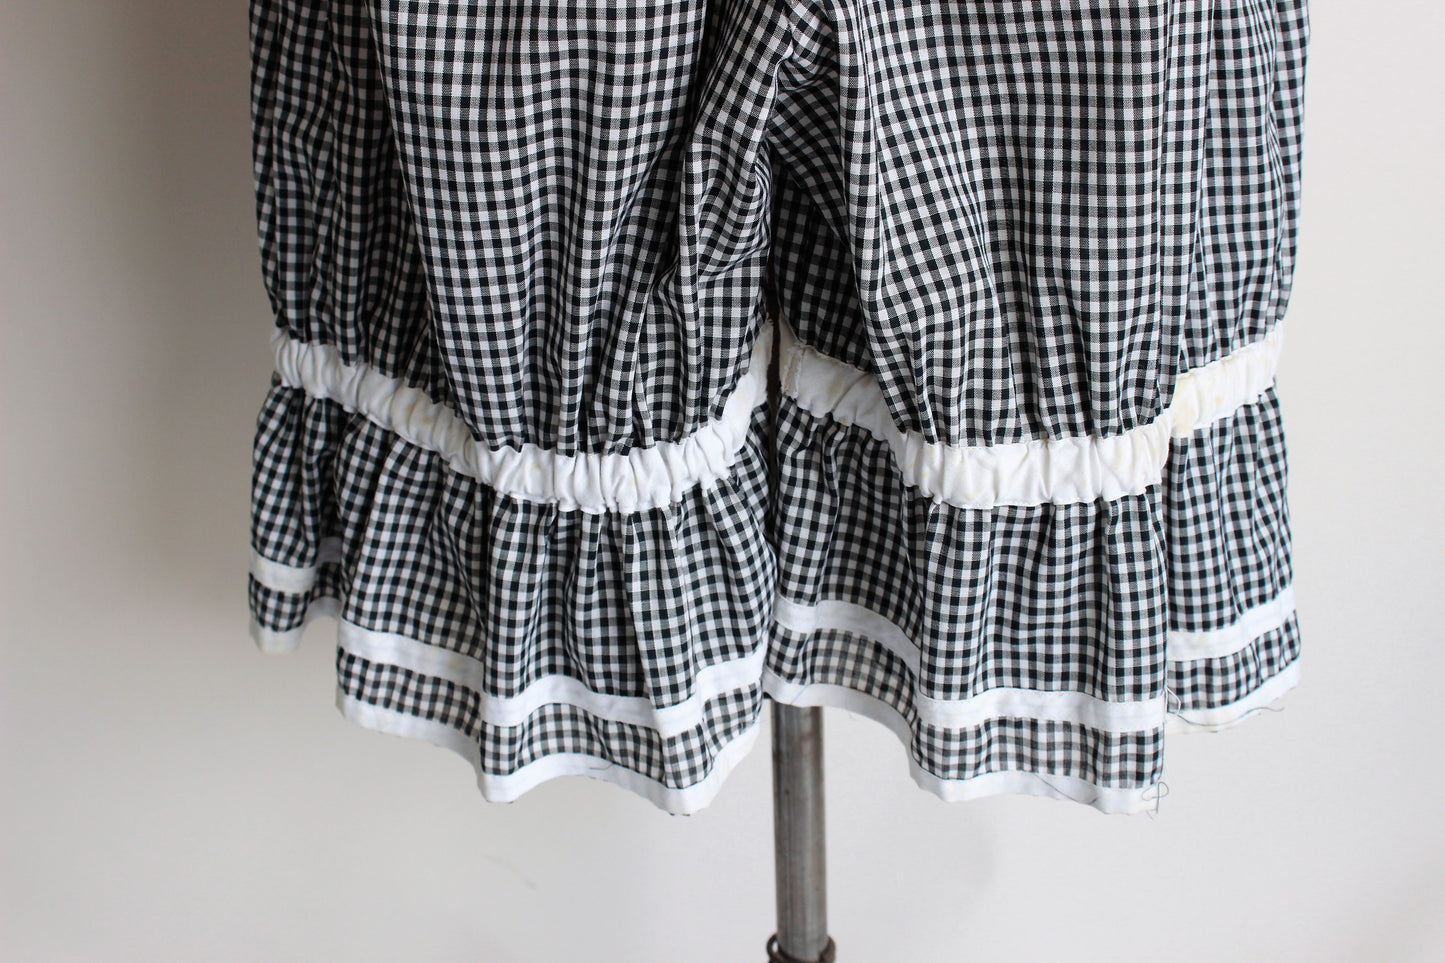 Vintage 1960s Gingham Swimsuit Costume in 1900s Style